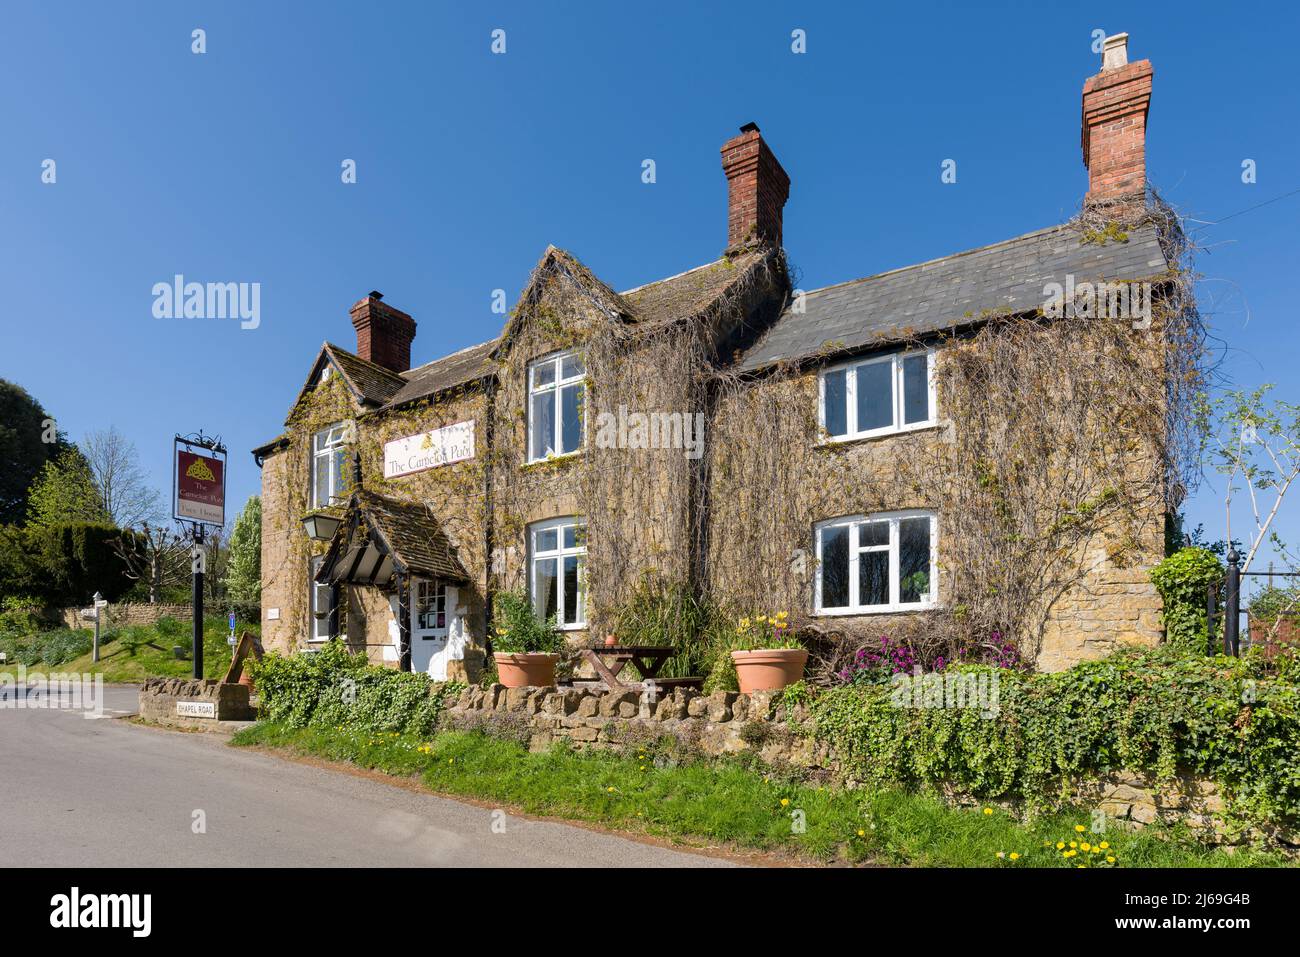 The Camelot public house in the village of South Cadbury, Somerset, England. Stock Photo